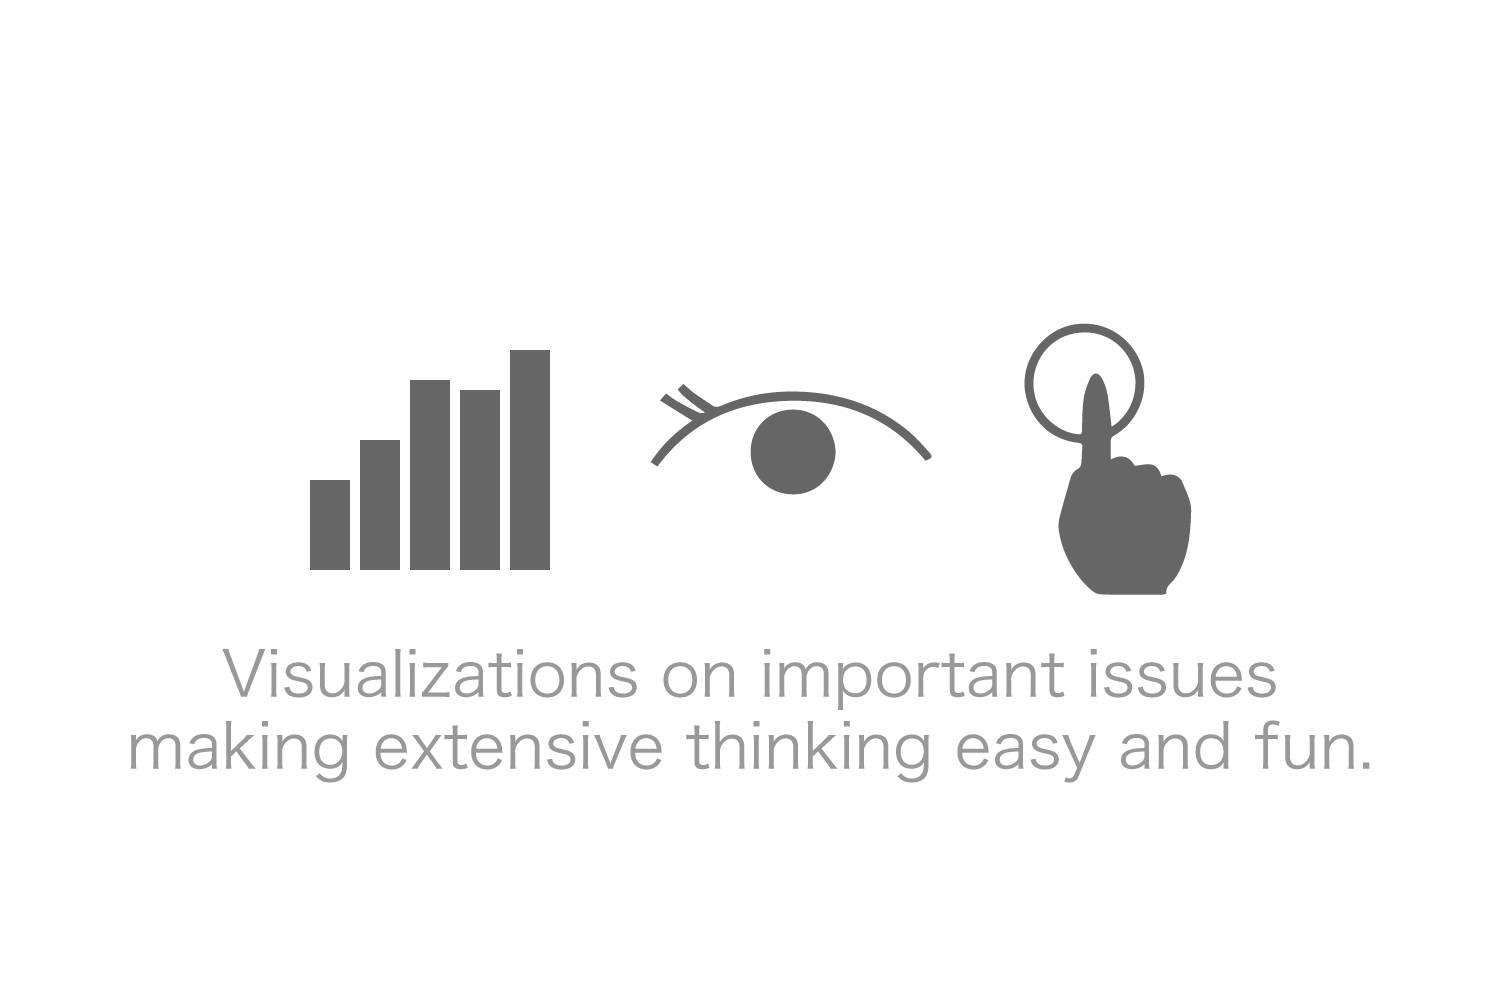 Visualization on important issues making extensive thinking easy and fun.